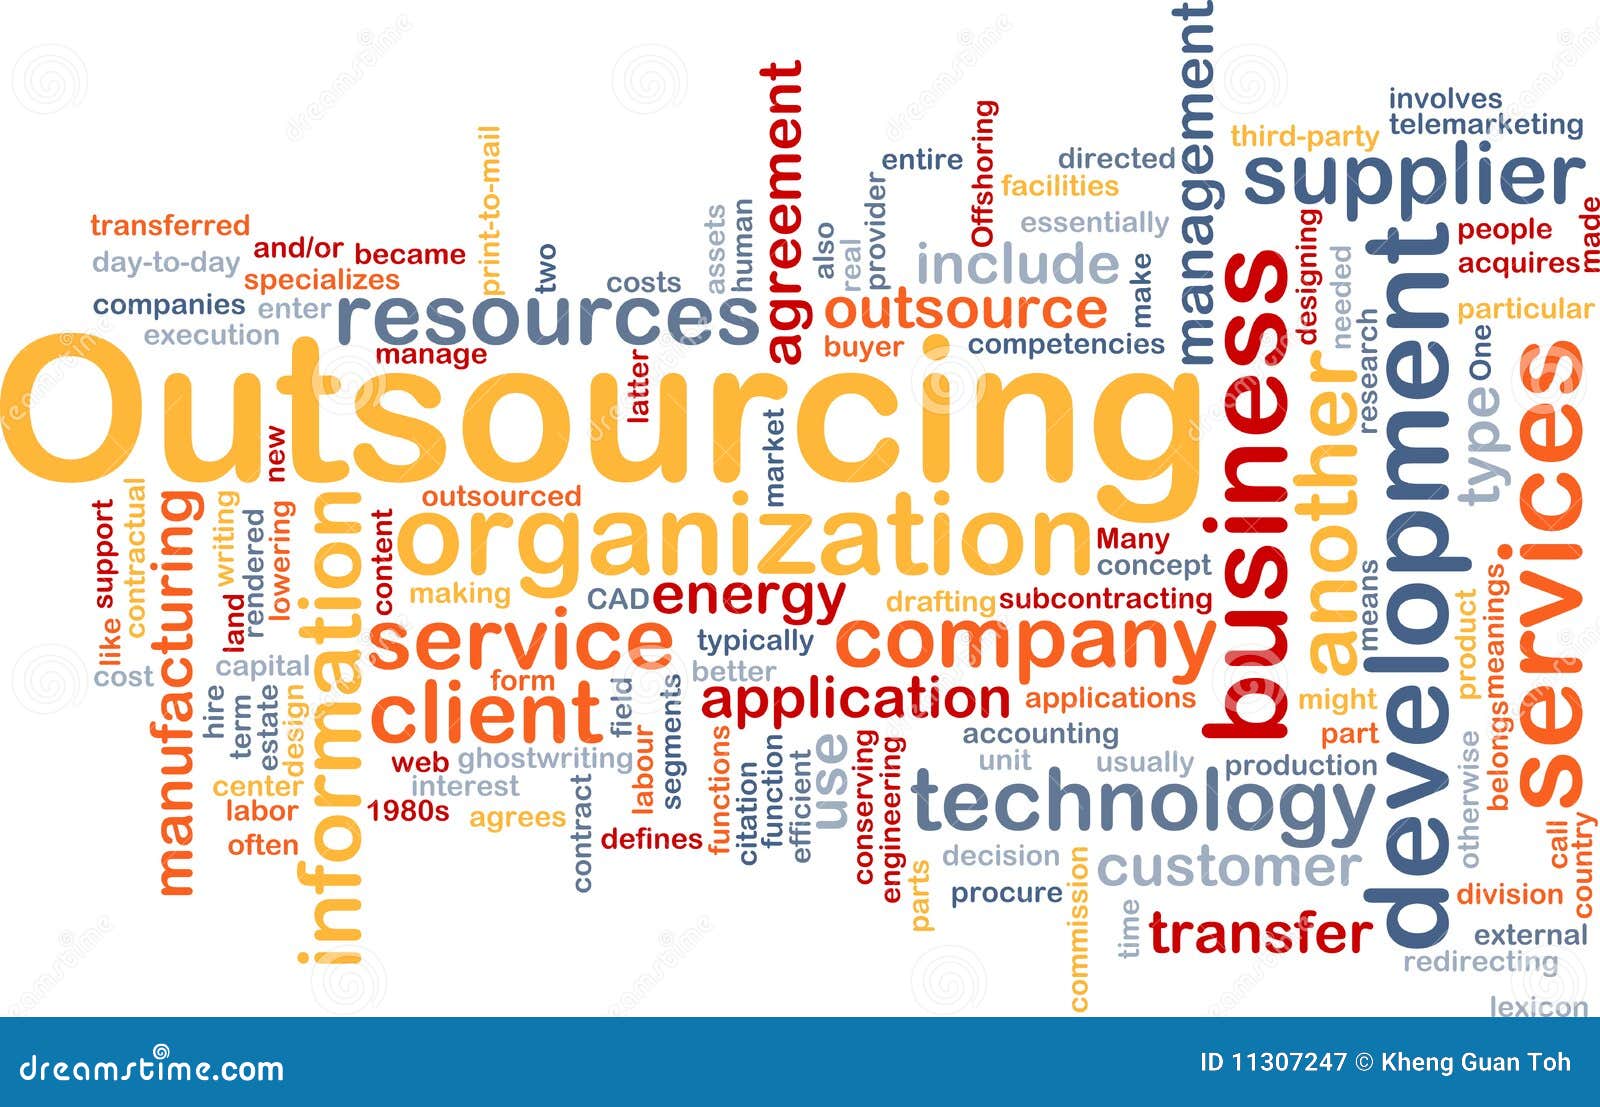 Problems With Outsourcing And How To Overcome Them